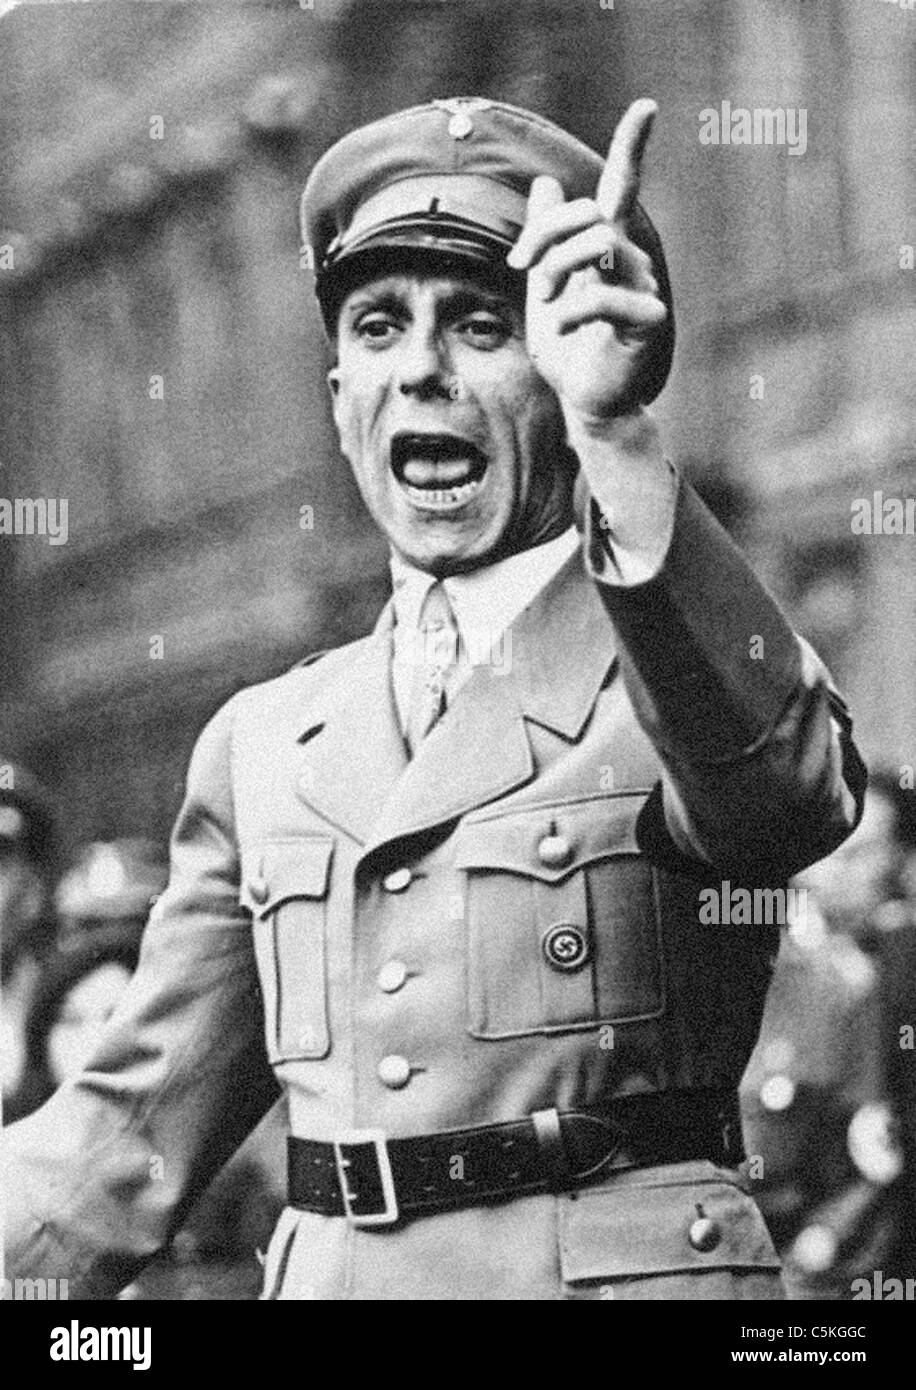 Joseph Goebbels German wartime Minister of Propaganda from the archives of Press Portrait Service Stock Photo